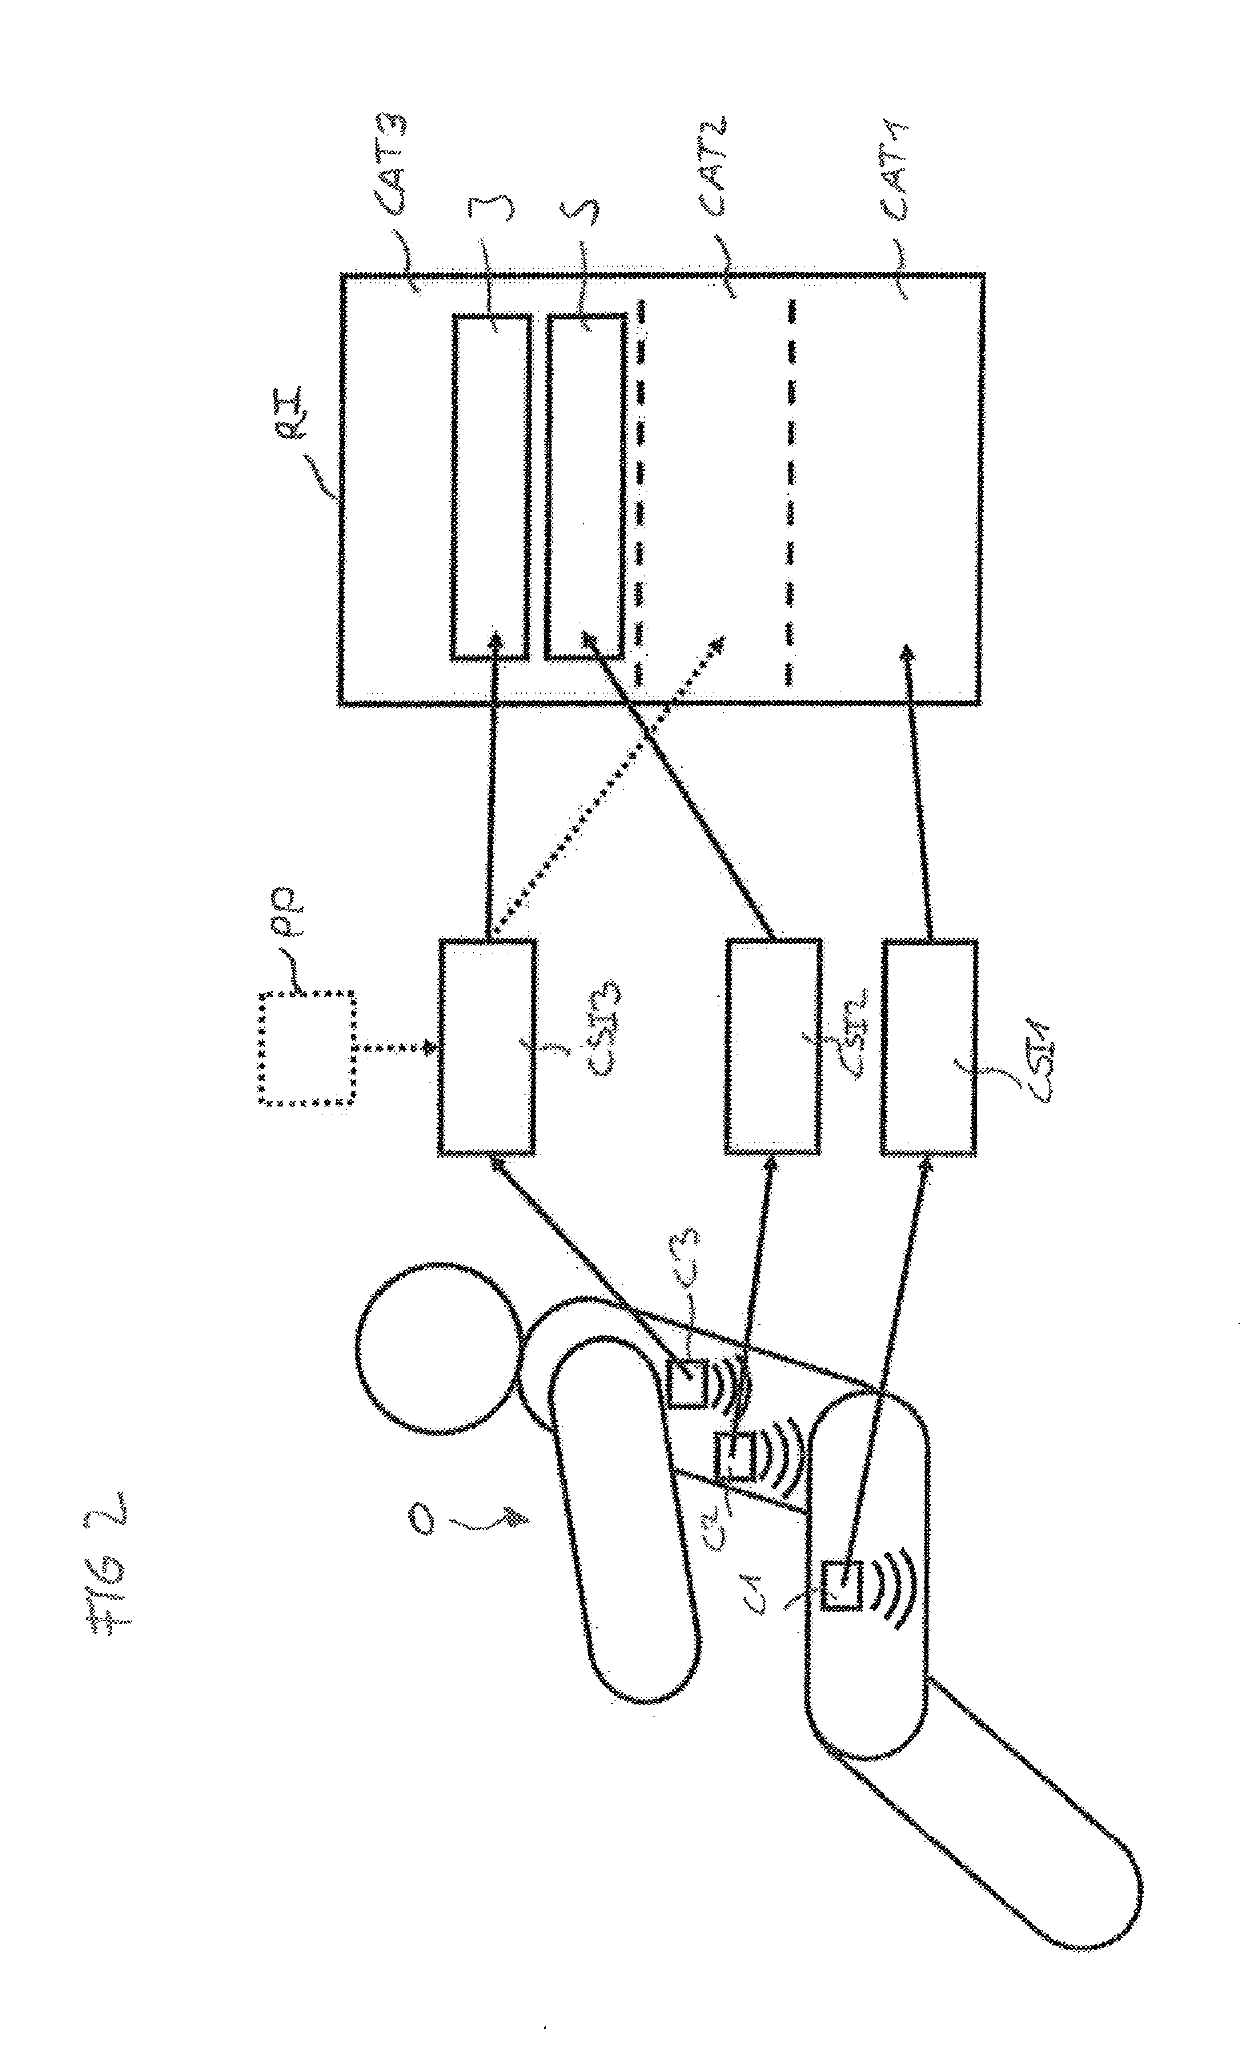 Method for adjusting a temperature of a seat